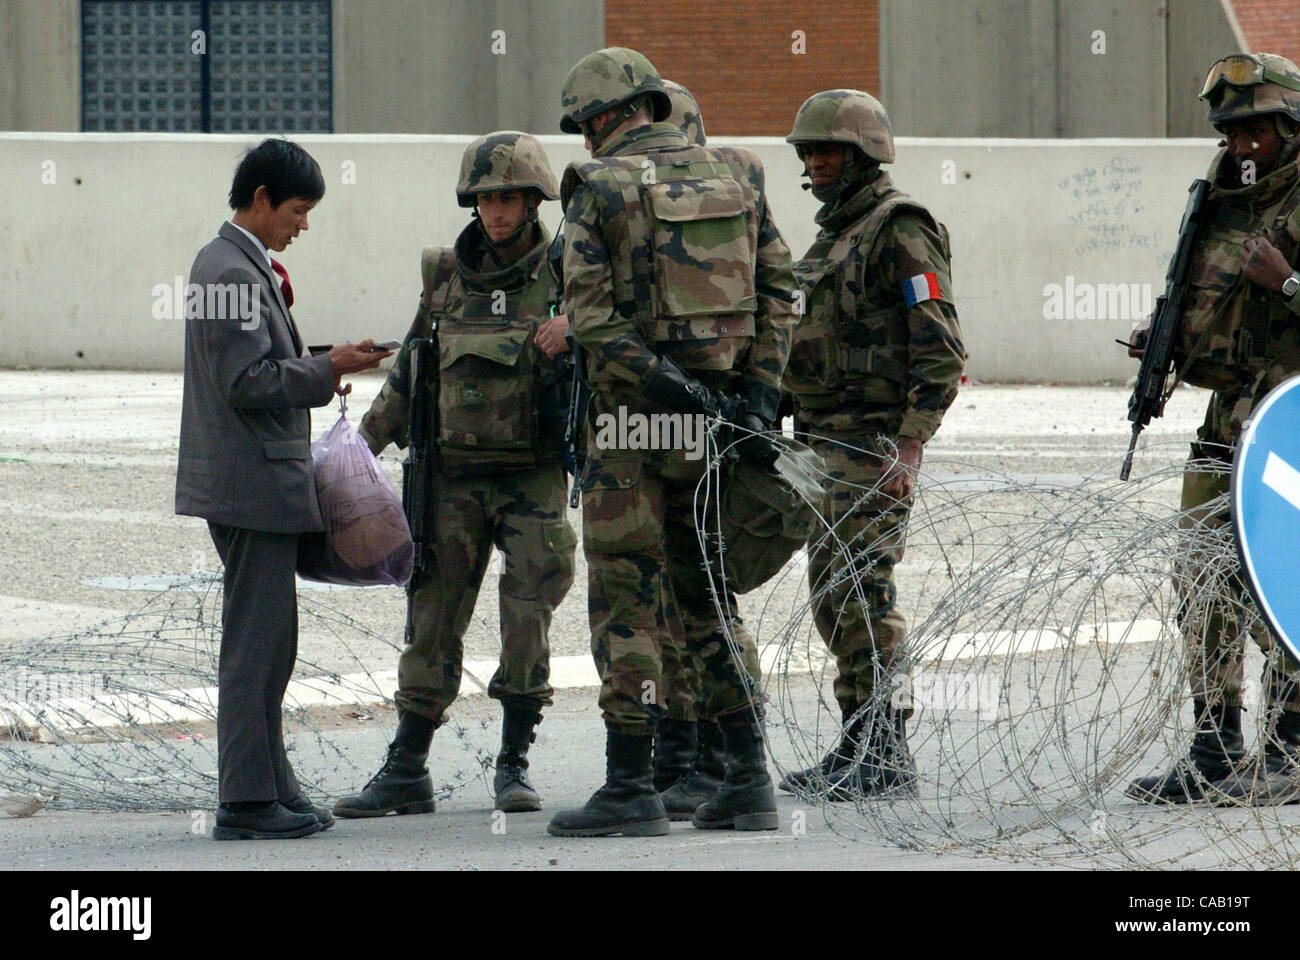 Mar 22, 2004; Kosovo, SERBIA; French soldiers, part of NATO-led peacekeepers in Kosovo (KFOR), checking a person that wants to cross the bridge in Kosovska Mitrovica, near the bridge that divides this troubled city into North (controlled by Serbs) and South (controlled by Albanians). The bridge is b Stock Photo